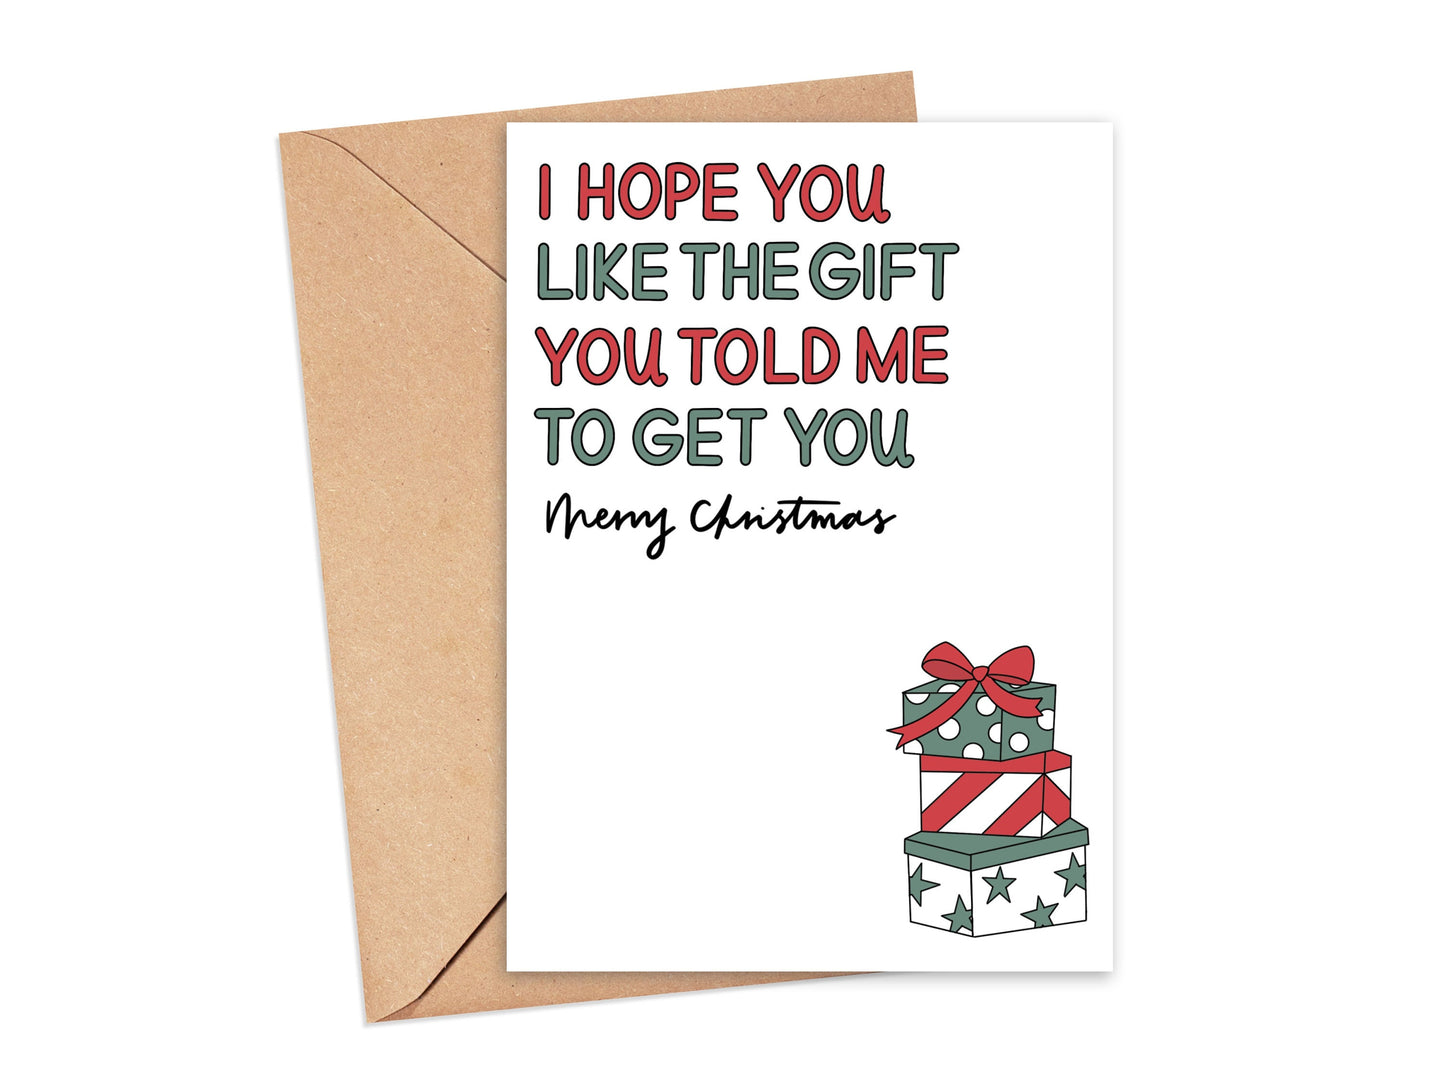 I Hope You Like the Gift You Told Me to Get You Christmas Card Simply Happy Cards